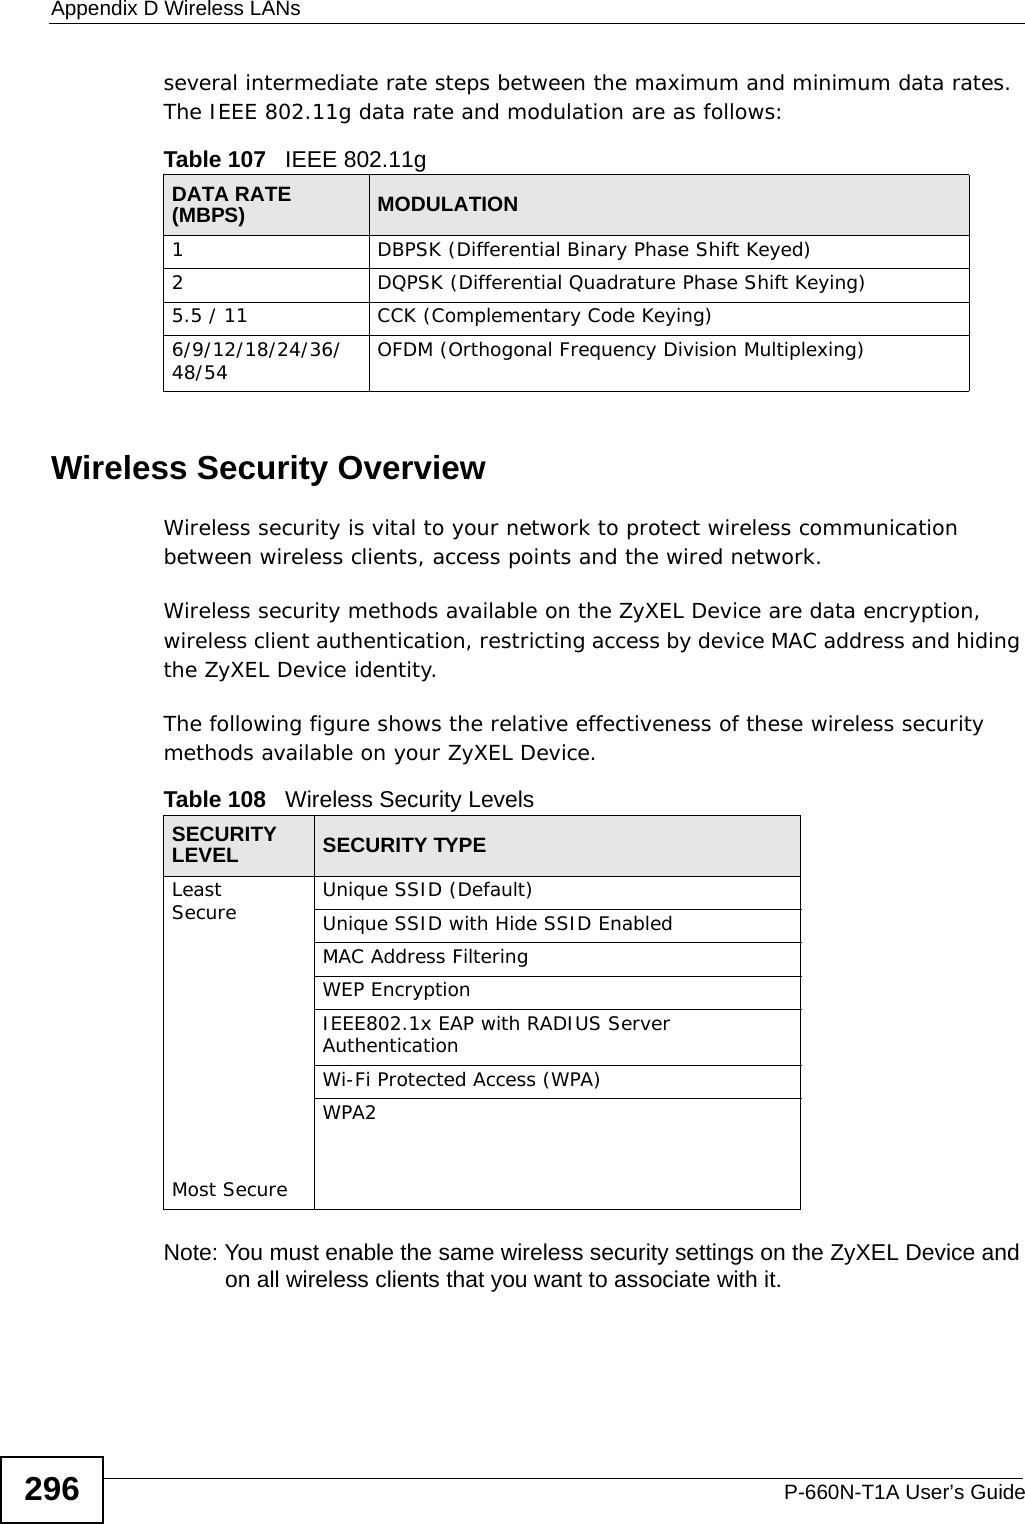 Appendix D Wireless LANsP-660N-T1A User’s Guide296several intermediate rate steps between the maximum and minimum data rates. The IEEE 802.11g data rate and modulation are as follows:Wireless Security OverviewWireless security is vital to your network to protect wireless communication between wireless clients, access points and the wired network.Wireless security methods available on the ZyXEL Device are data encryption, wireless client authentication, restricting access by device MAC address and hiding the ZyXEL Device identity.The following figure shows the relative effectiveness of these wireless security methods available on your ZyXEL Device.Note: You must enable the same wireless security settings on the ZyXEL Device and on all wireless clients that you want to associate with it. Table 107   IEEE 802.11gDATA RATE (MBPS) MODULATION1 DBPSK (Differential Binary Phase Shift Keyed)2 DQPSK (Differential Quadrature Phase Shift Keying)5.5 / 11 CCK (Complementary Code Keying) 6/9/12/18/24/36/48/54 OFDM (Orthogonal Frequency Division Multiplexing) Table 108   Wireless Security LevelsSECURITY LEVEL SECURITY TYPELeast       Secure                                                                                  Most SecureUnique SSID (Default)Unique SSID with Hide SSID EnabledMAC Address FilteringWEP EncryptionIEEE802.1x EAP with RADIUS Server AuthenticationWi-Fi Protected Access (WPA)WPA2